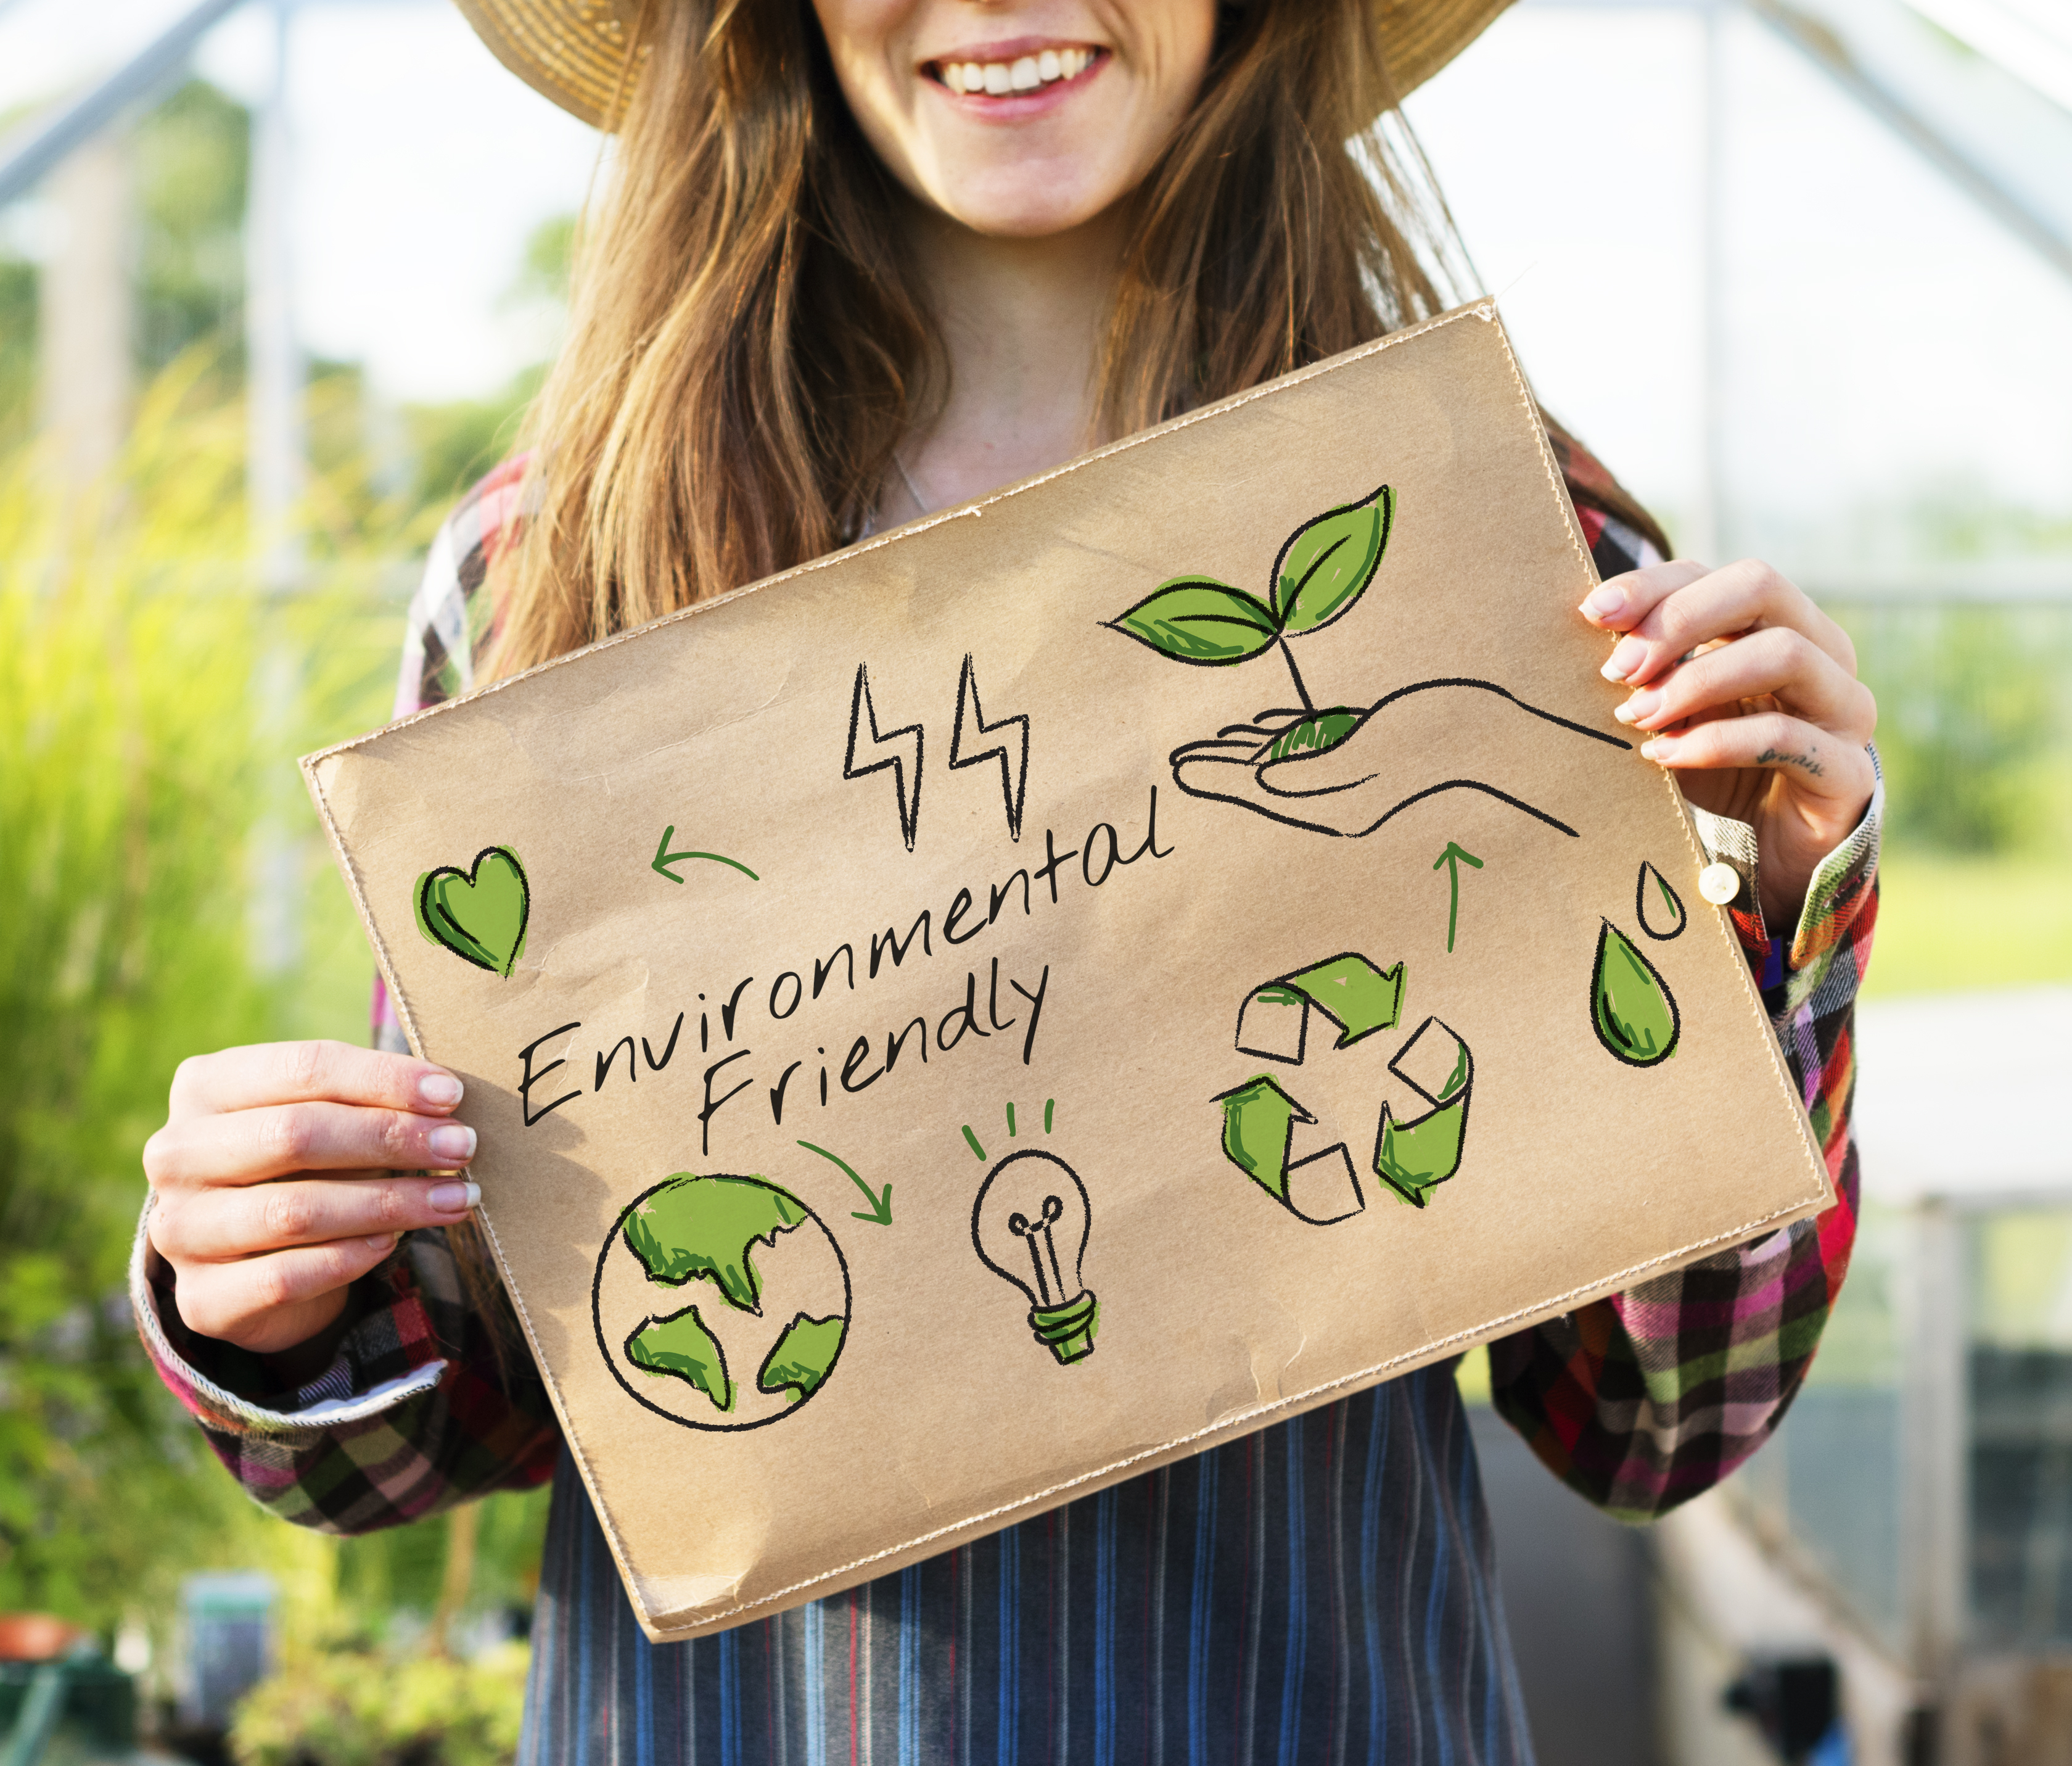 Woman holding up a sign that says environmentally friendly